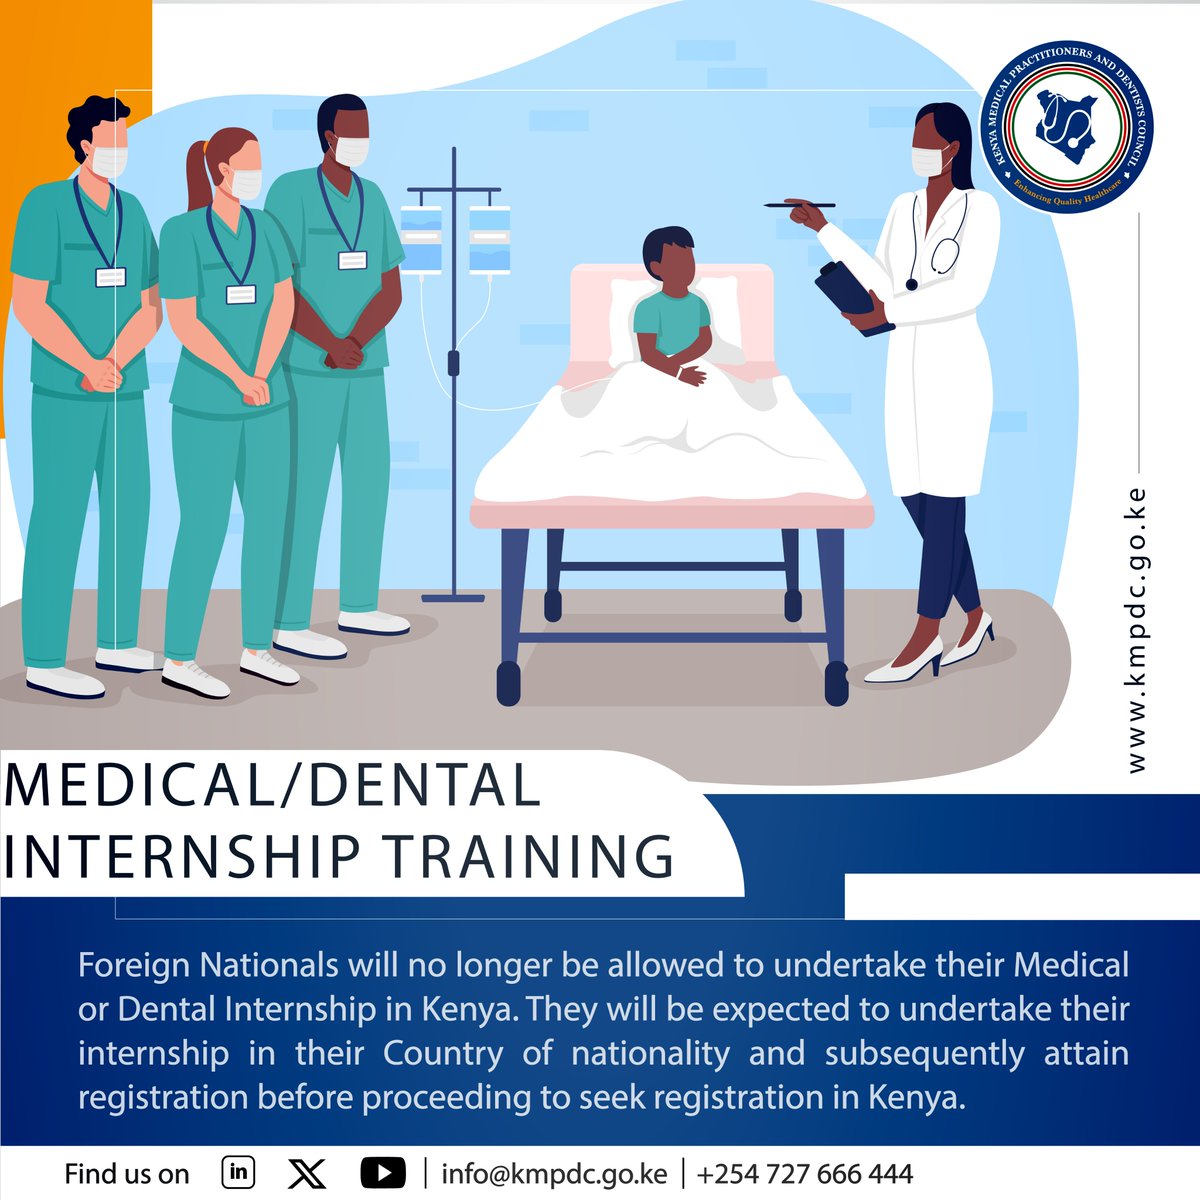 Foreign Nationals will no longer be allowed to undertake their Medical or Dental Internship in Kenya. They will be expected to undertake their internship in their Country of nationality and subsequently attain registration before proceeding to seek registration in Kenya.